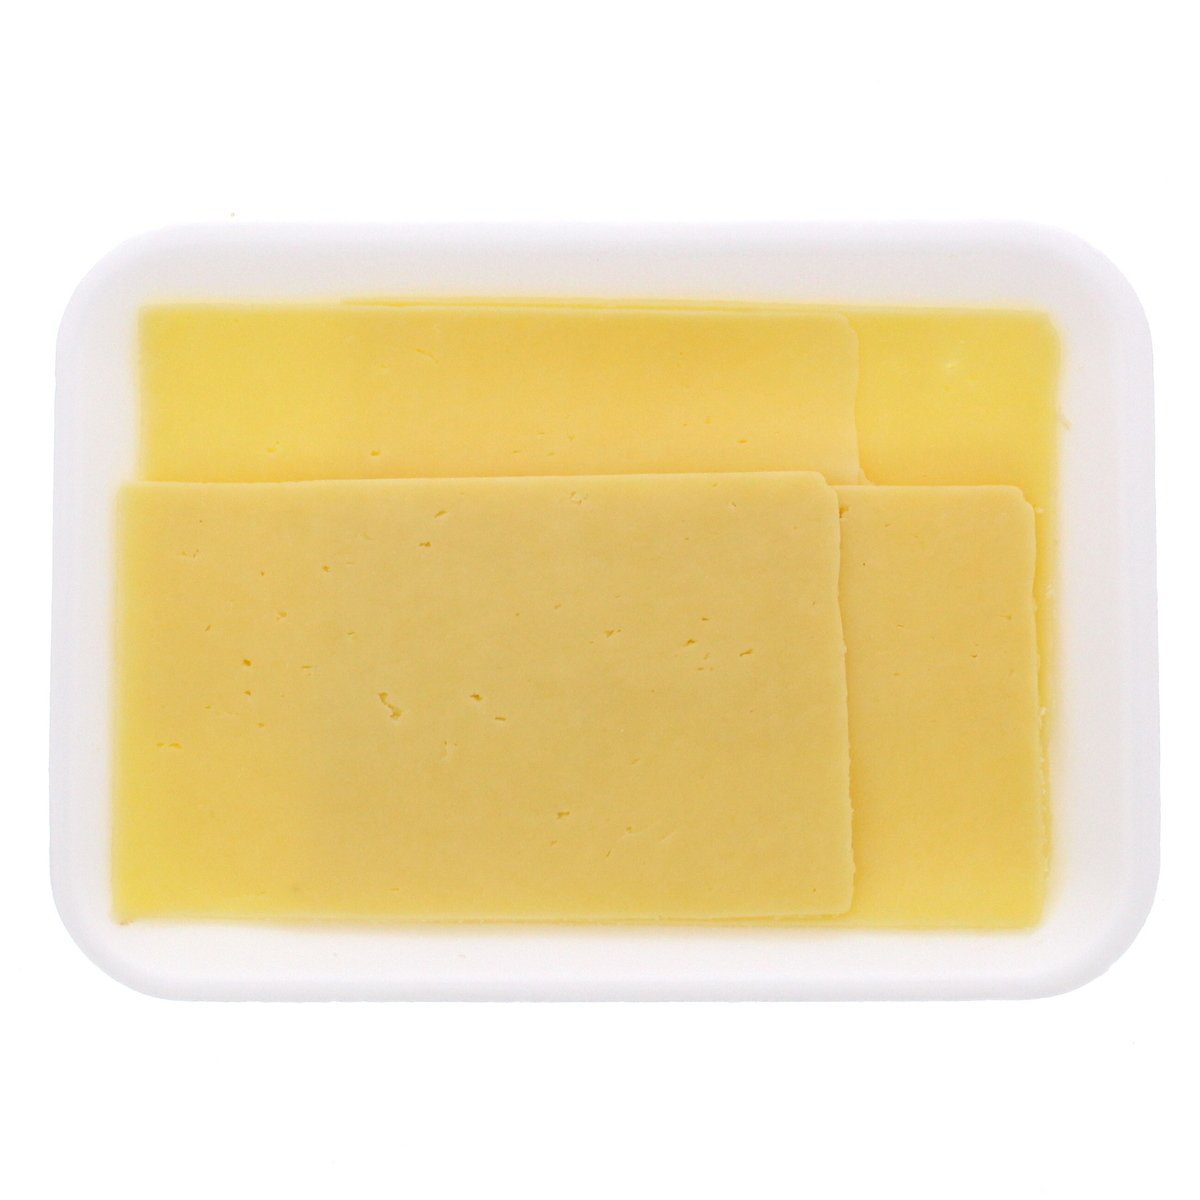 English Mild Cheddar Cheese 250g Approx. Weight